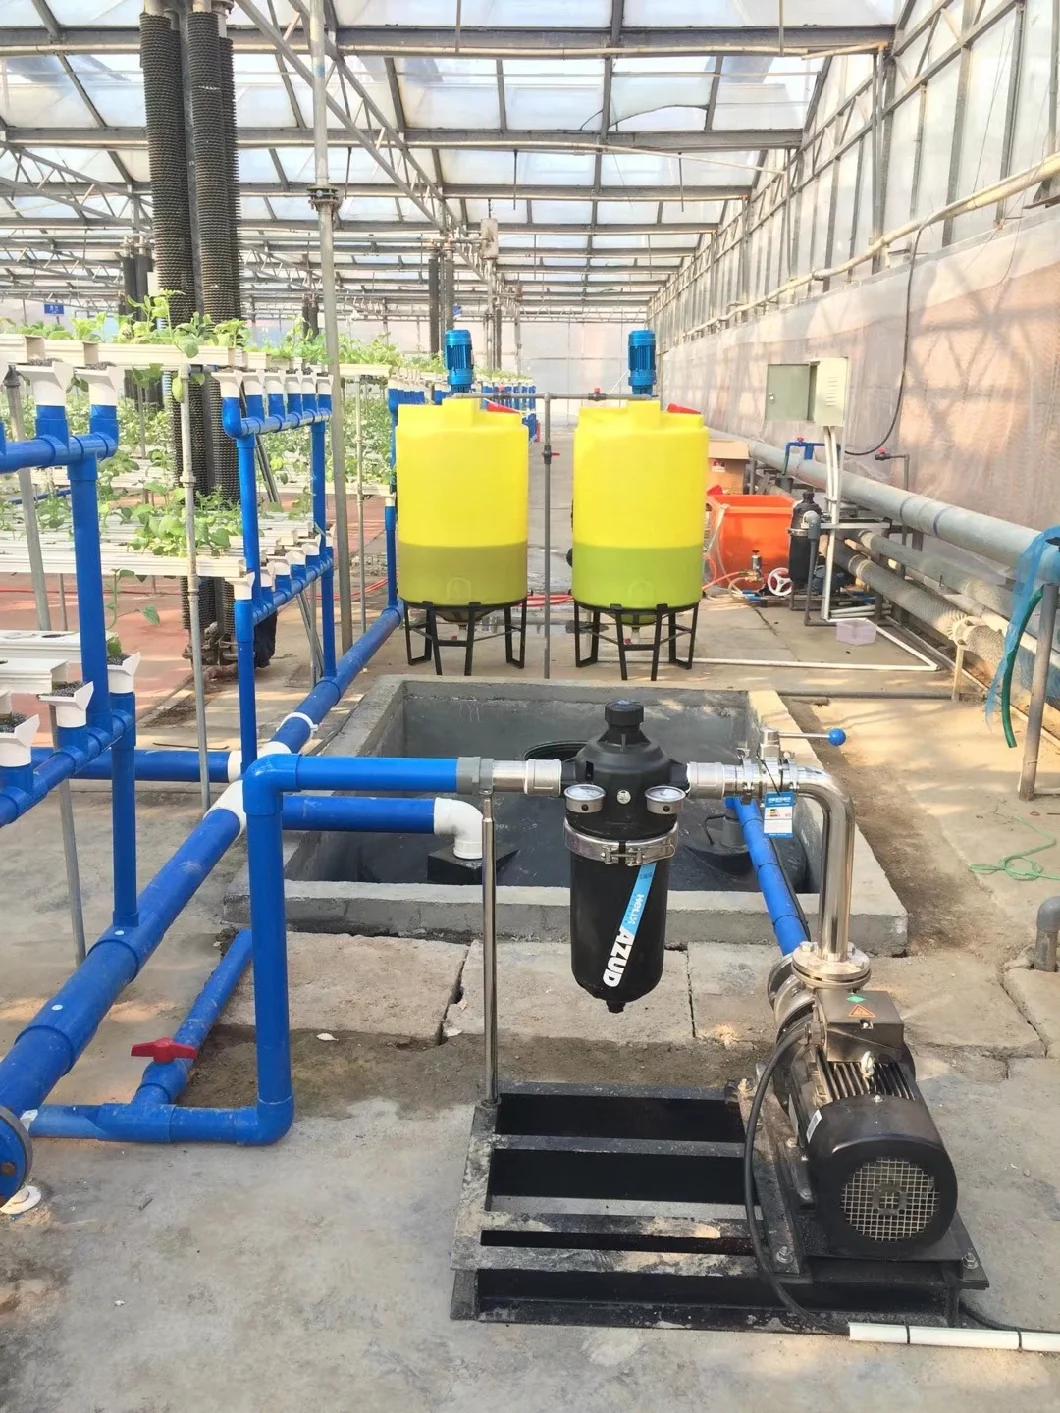 Energy Water Saving Automatic Intelligent Fertilizer System for Greenhouse Crops